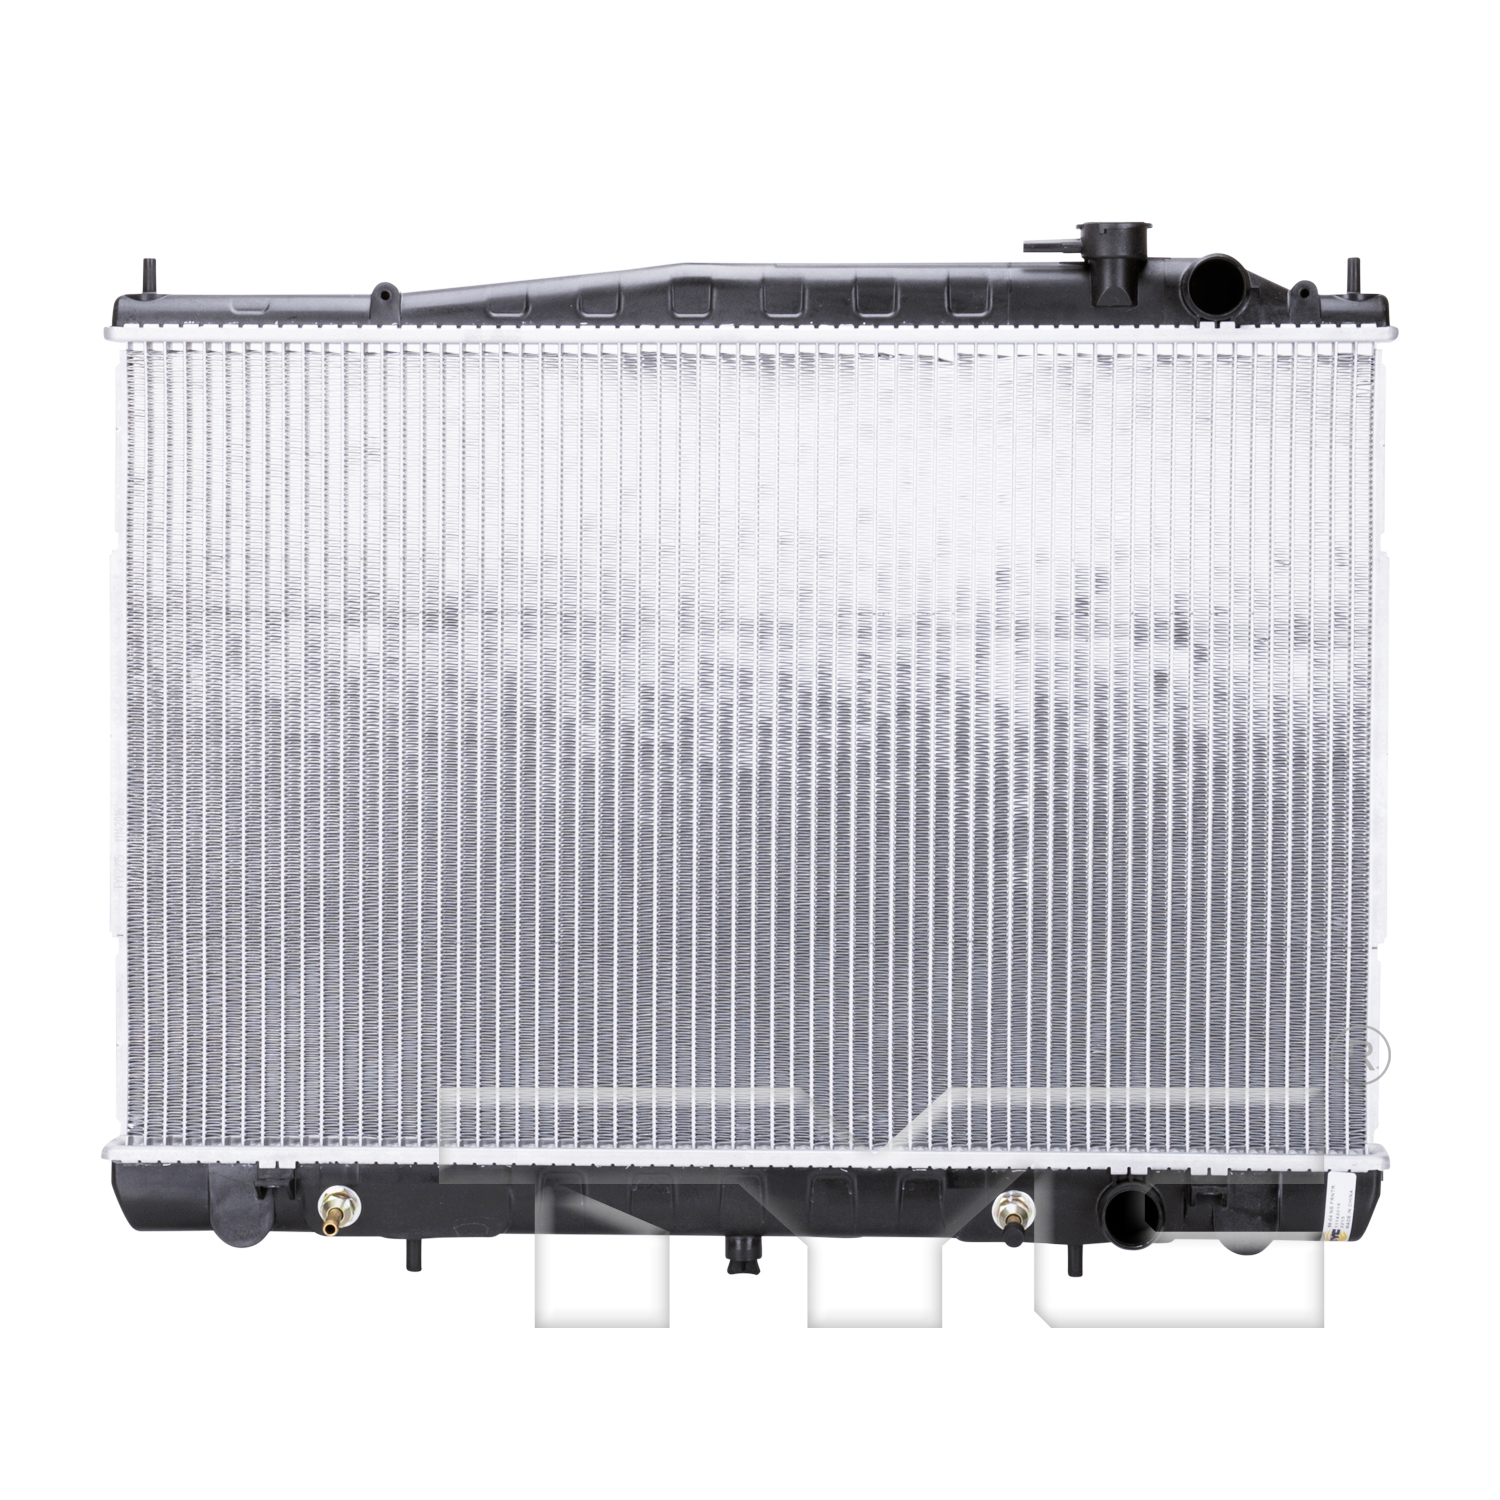 Aftermarket RADIATORS for NISSAN - FRONTIER, FRONTIER,98-00,Radiator assembly